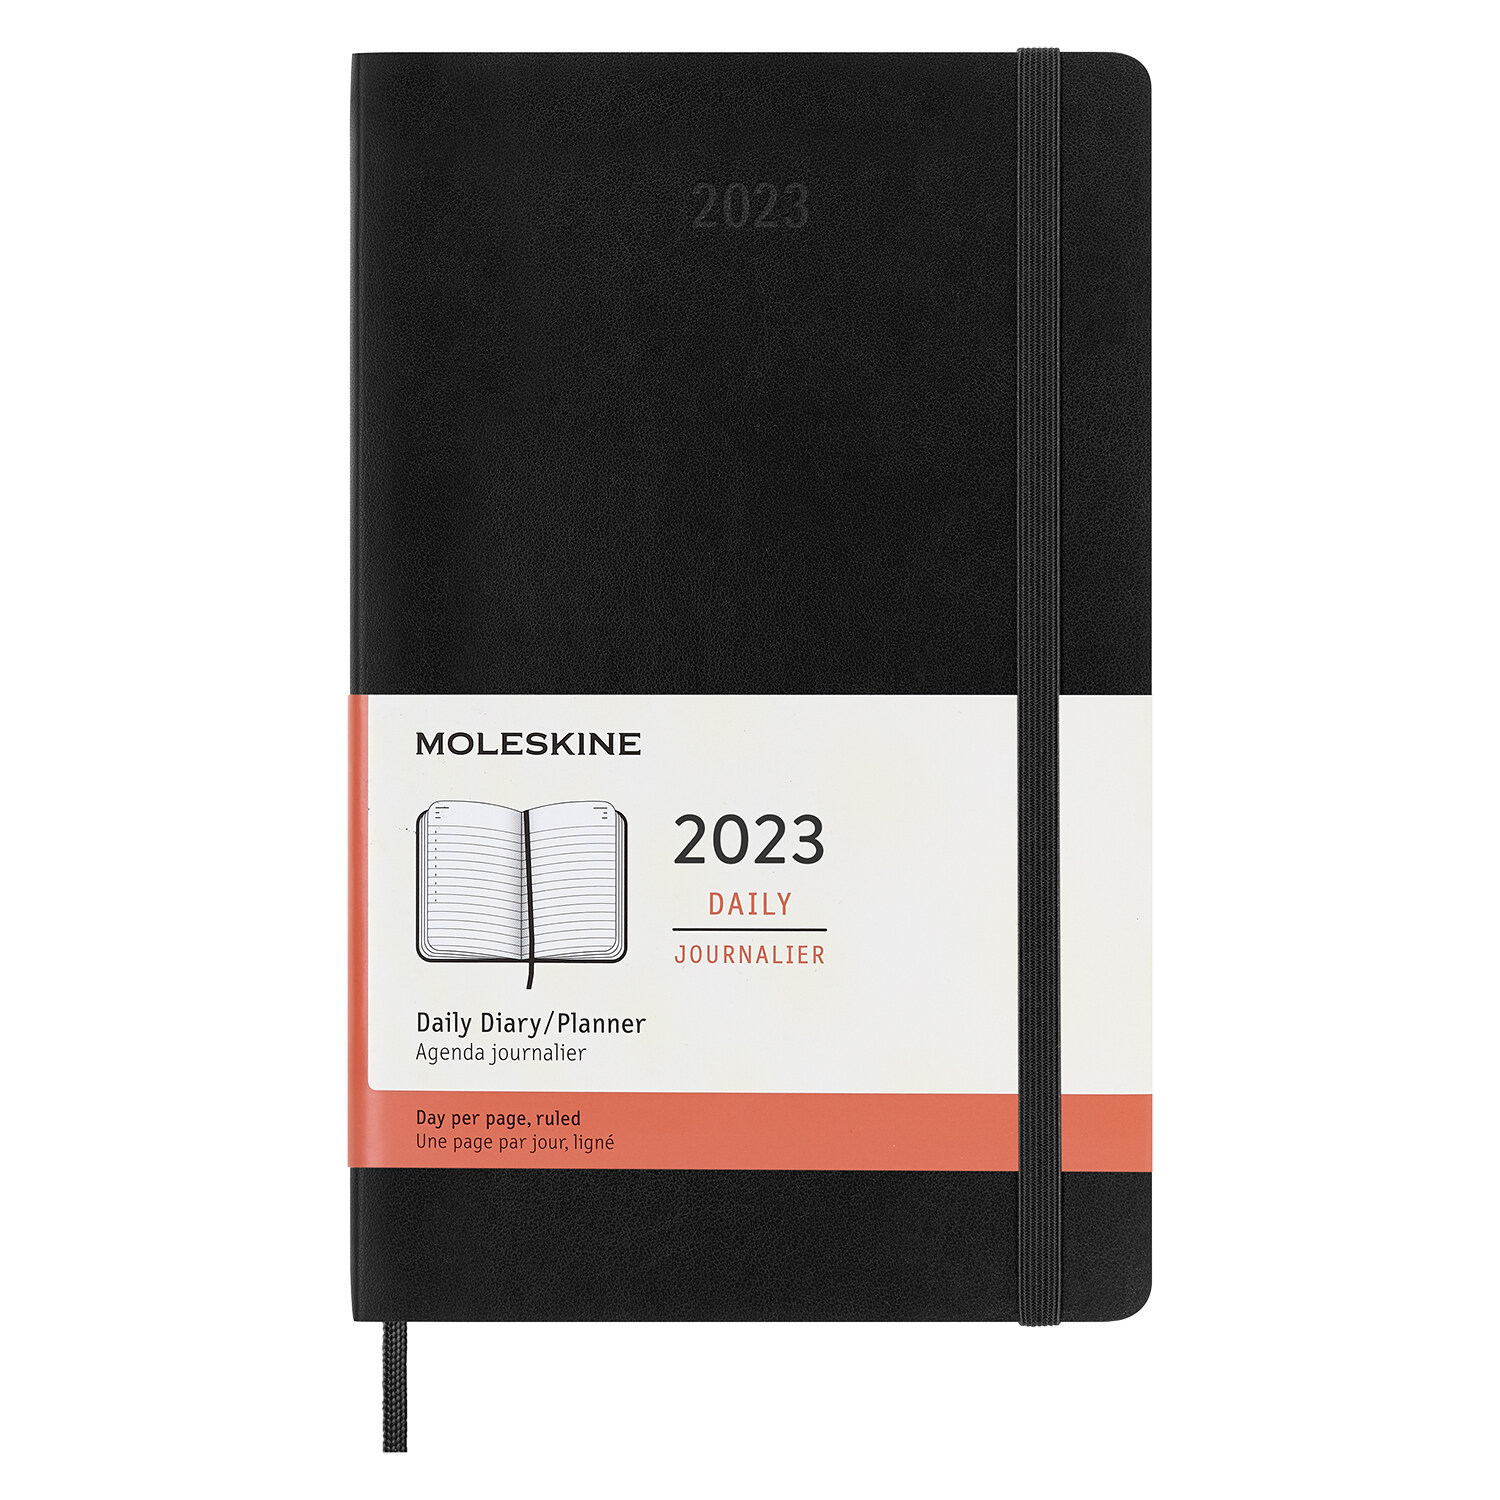 Moleskine 2023 Daily Planner, 12m, Large, Black, Soft Cover (5 X 8.25) (Other)